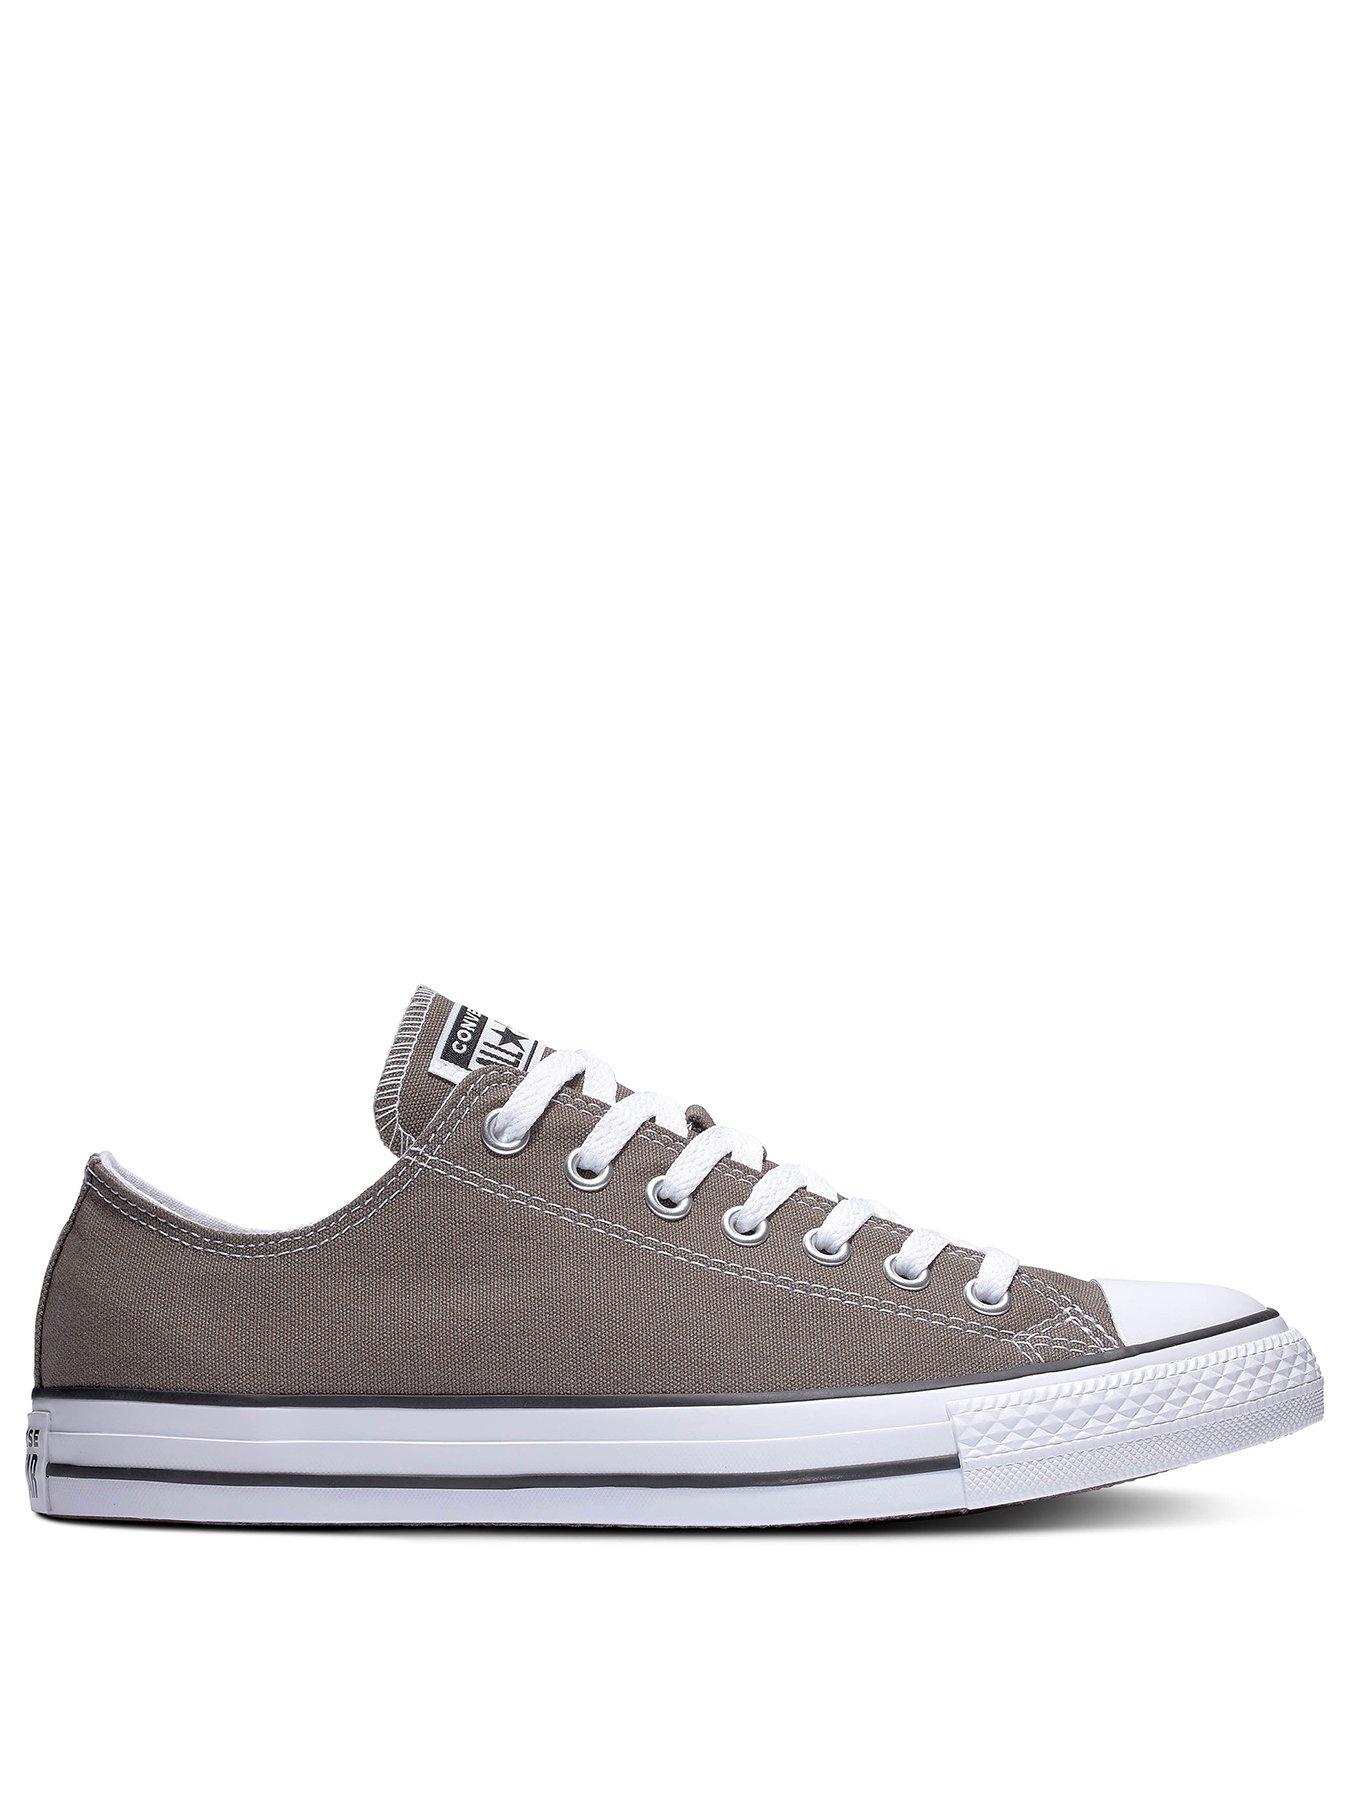 littlewoods mens trainers sale